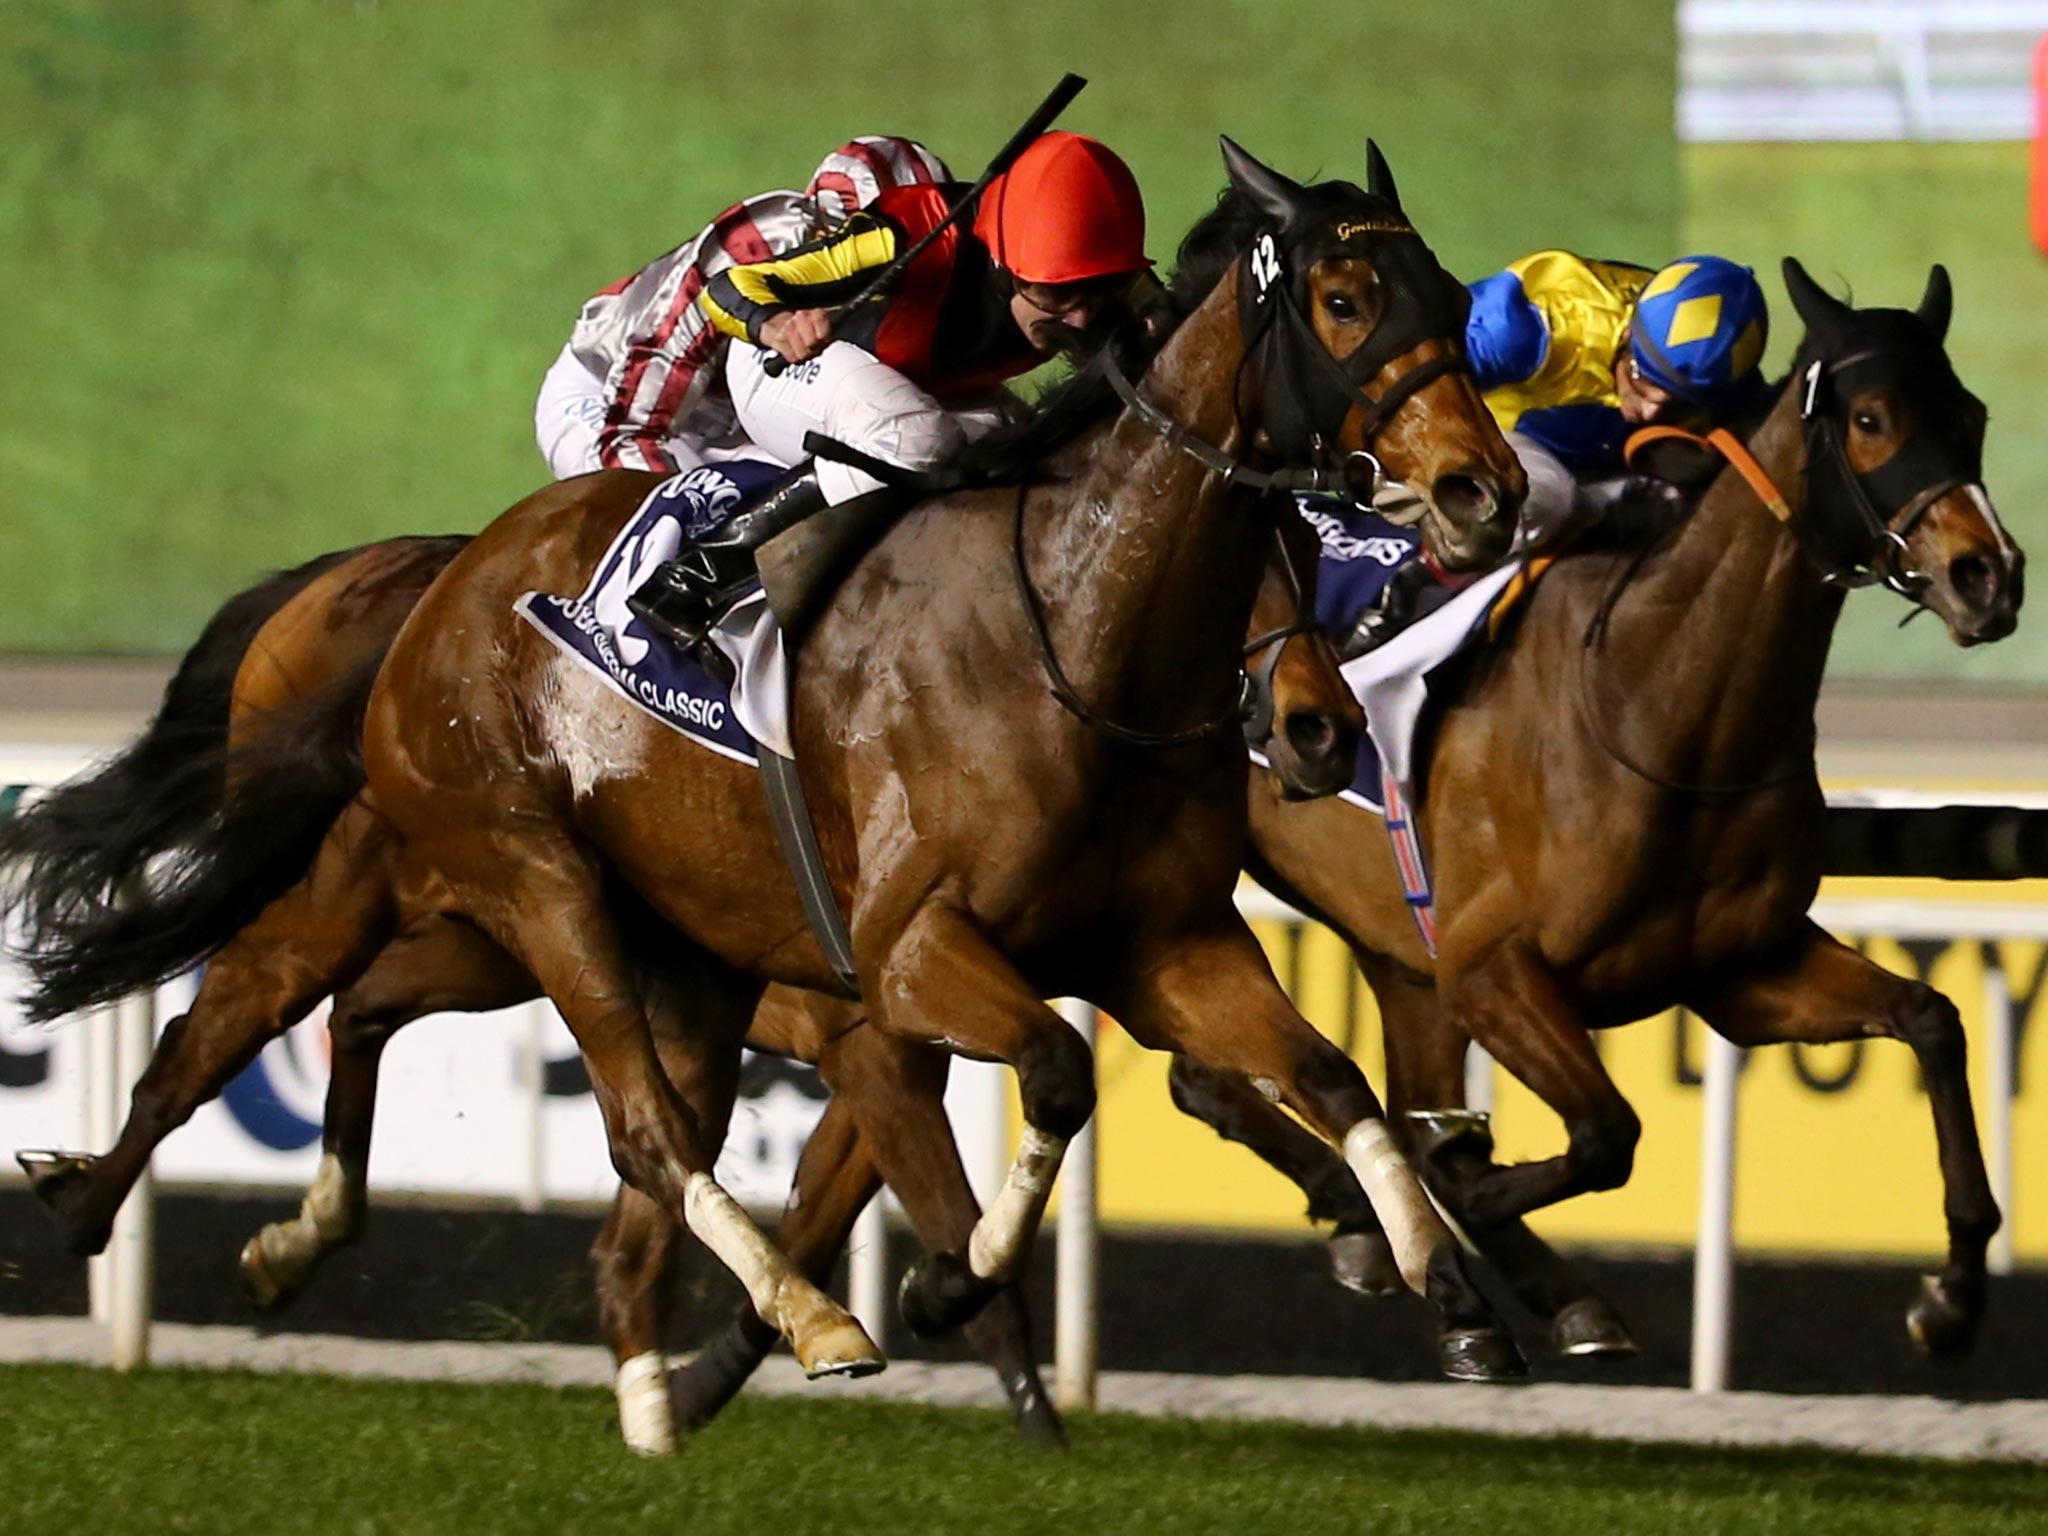 Thoroughbred racehorses could turn Britain's fortunes around